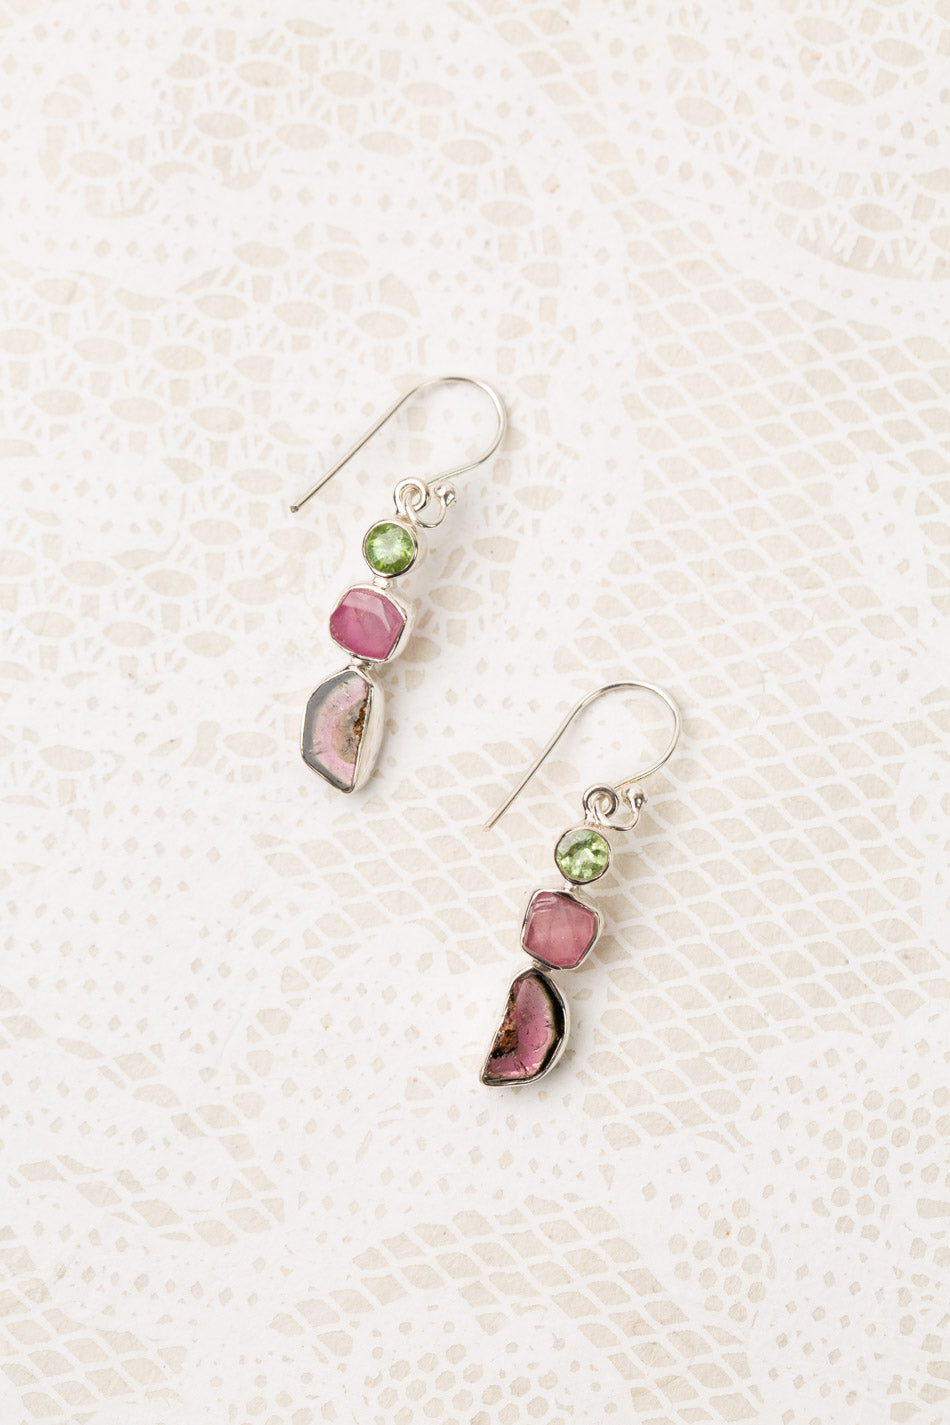 One Of A Kind Sterling Silver Pendants With Watermelon Tourmaline Slice, Natural Watermelon Tourmaline Statement Earrings